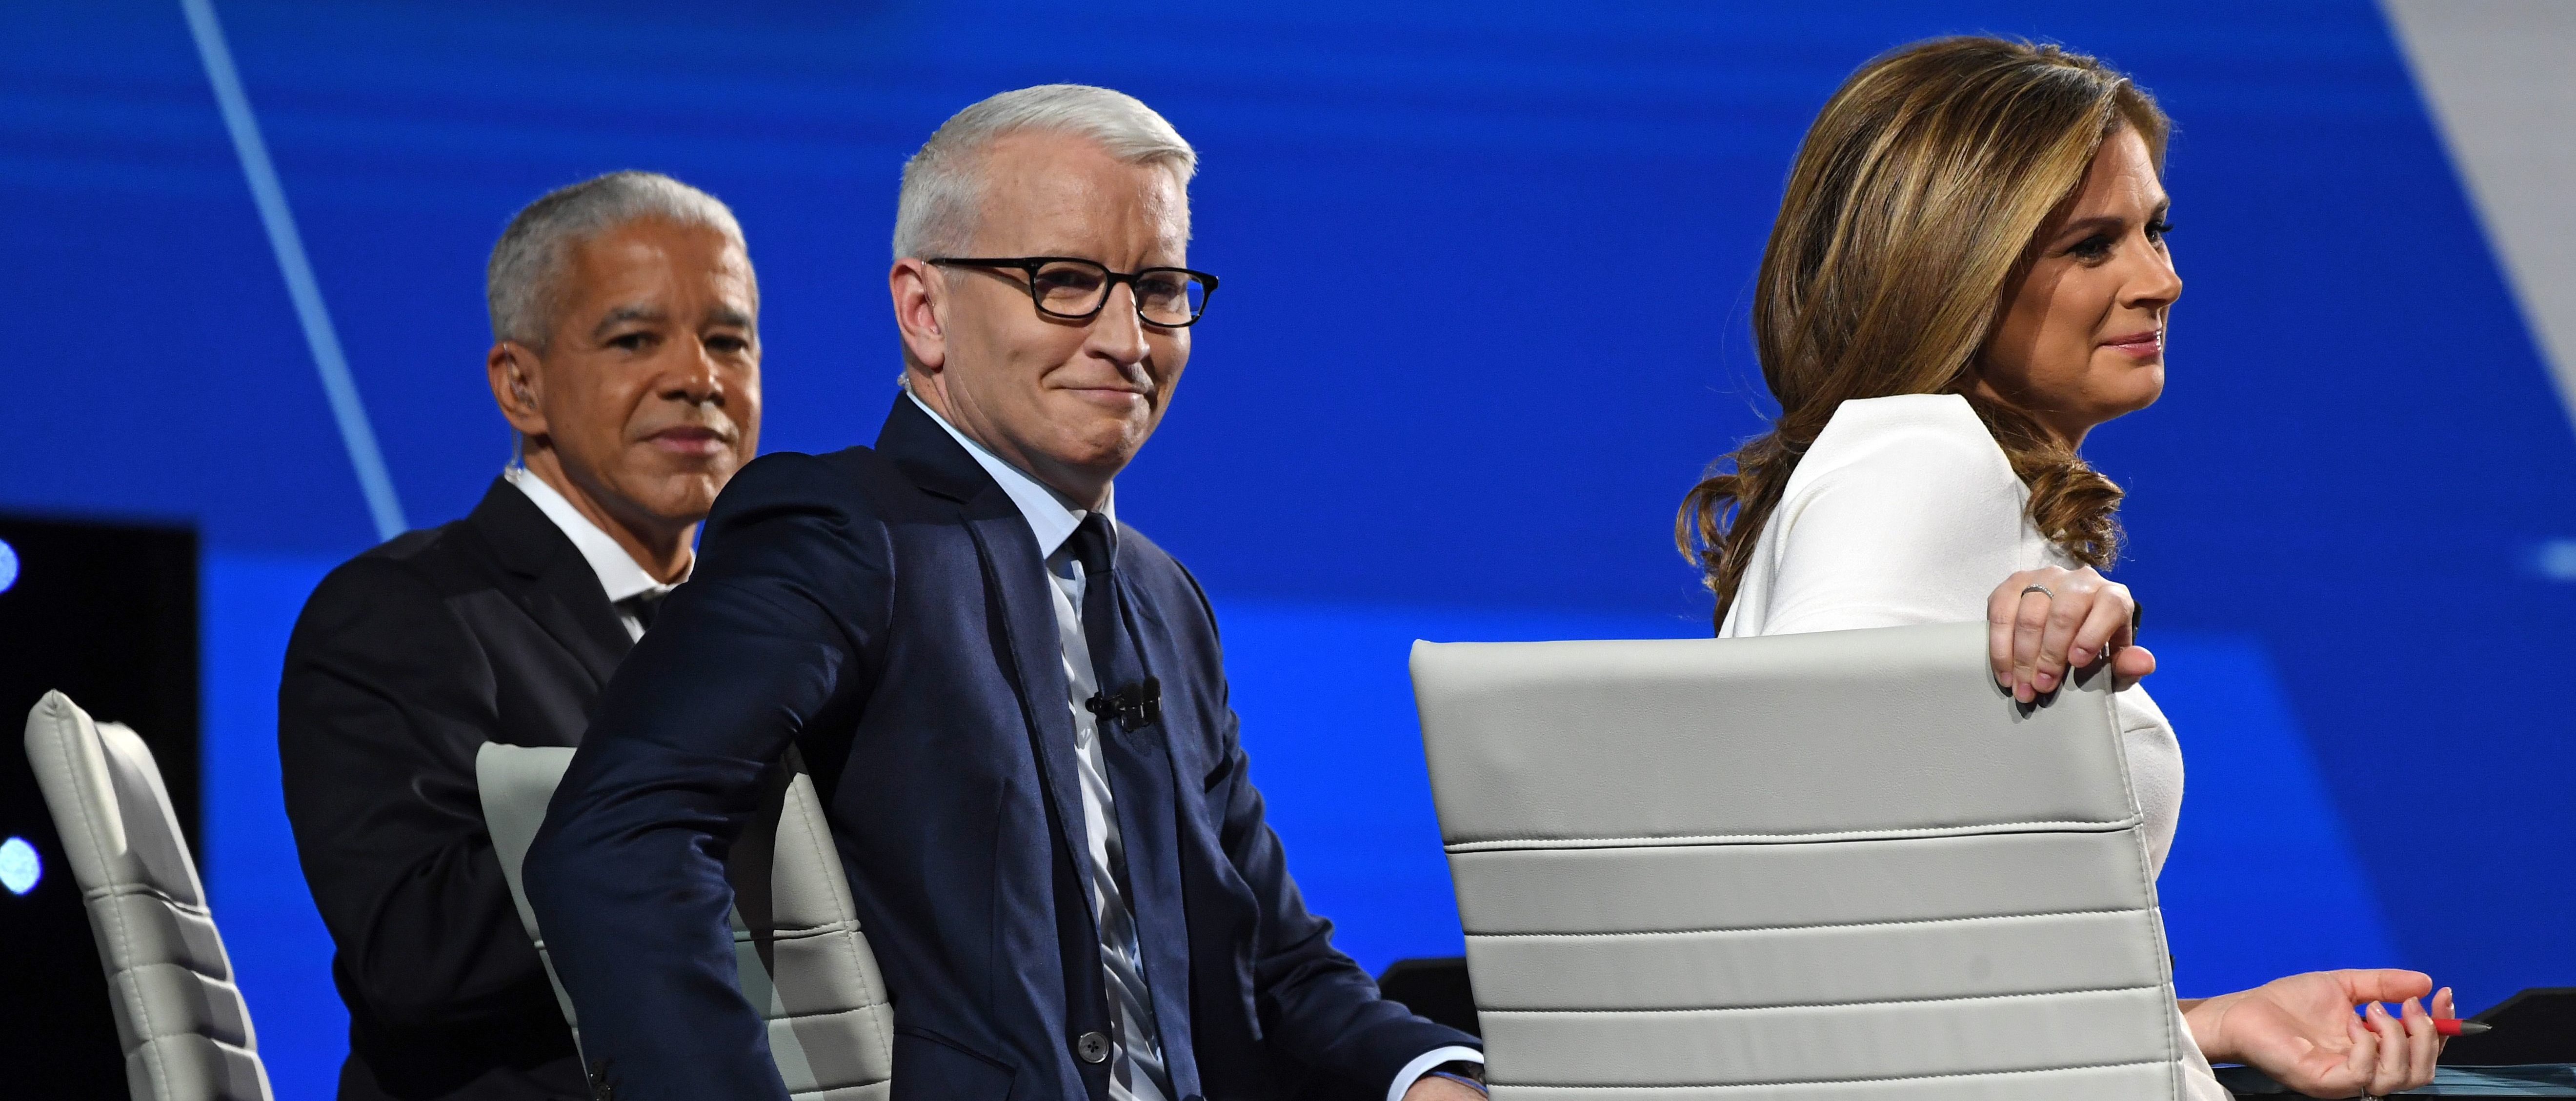 Moderator and The New York Times national editor Marc Lacey (L), moderator and CNN anchor Anderson Cooper (C) and moderator and CNN anchor Erin Burnett are pictured on stage ahead of the fourth Democratic primary debate of the 2020 presidential campaign season co-hosted by The New York Times and CNN at Otterbein University in Westerville, Ohio on October 15, 2019. (Photo by SAUL LOEB / AFP) (Photo by SAUL LOEB/AFP via Getty Images)